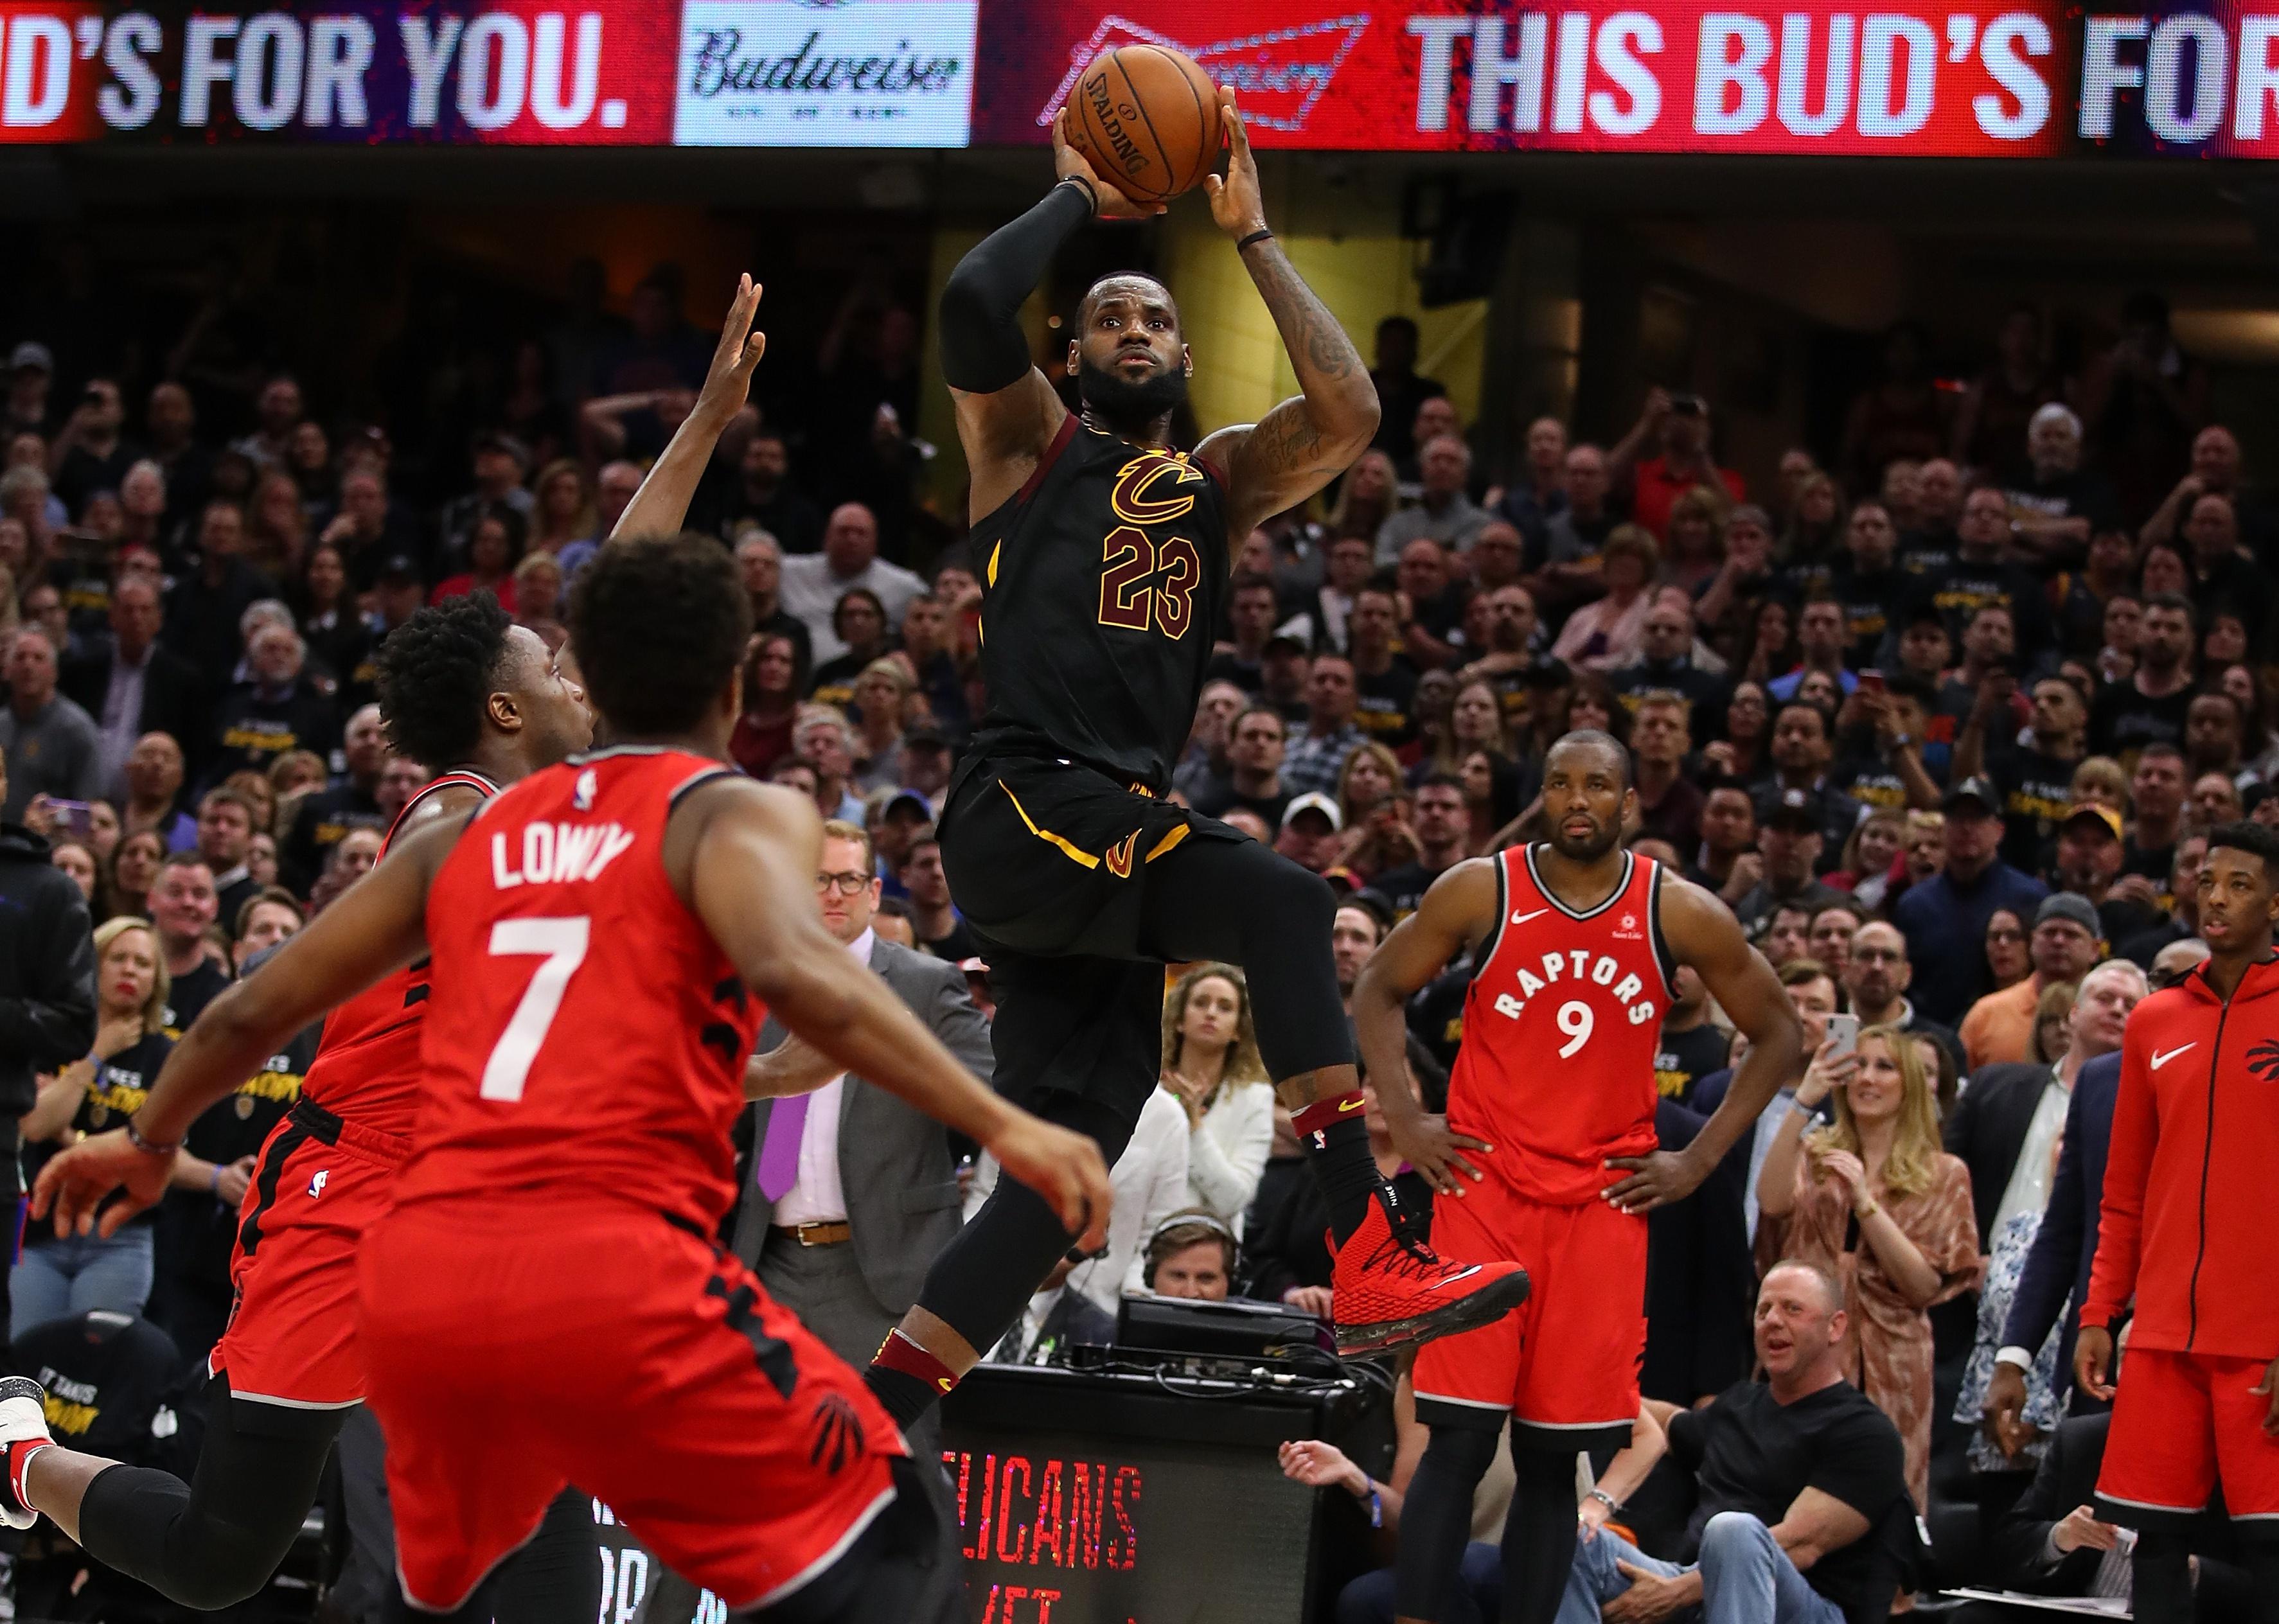 LeBron James of the Cleveland Cavaliers hits the game-winning shot over the Toronto Raptors.